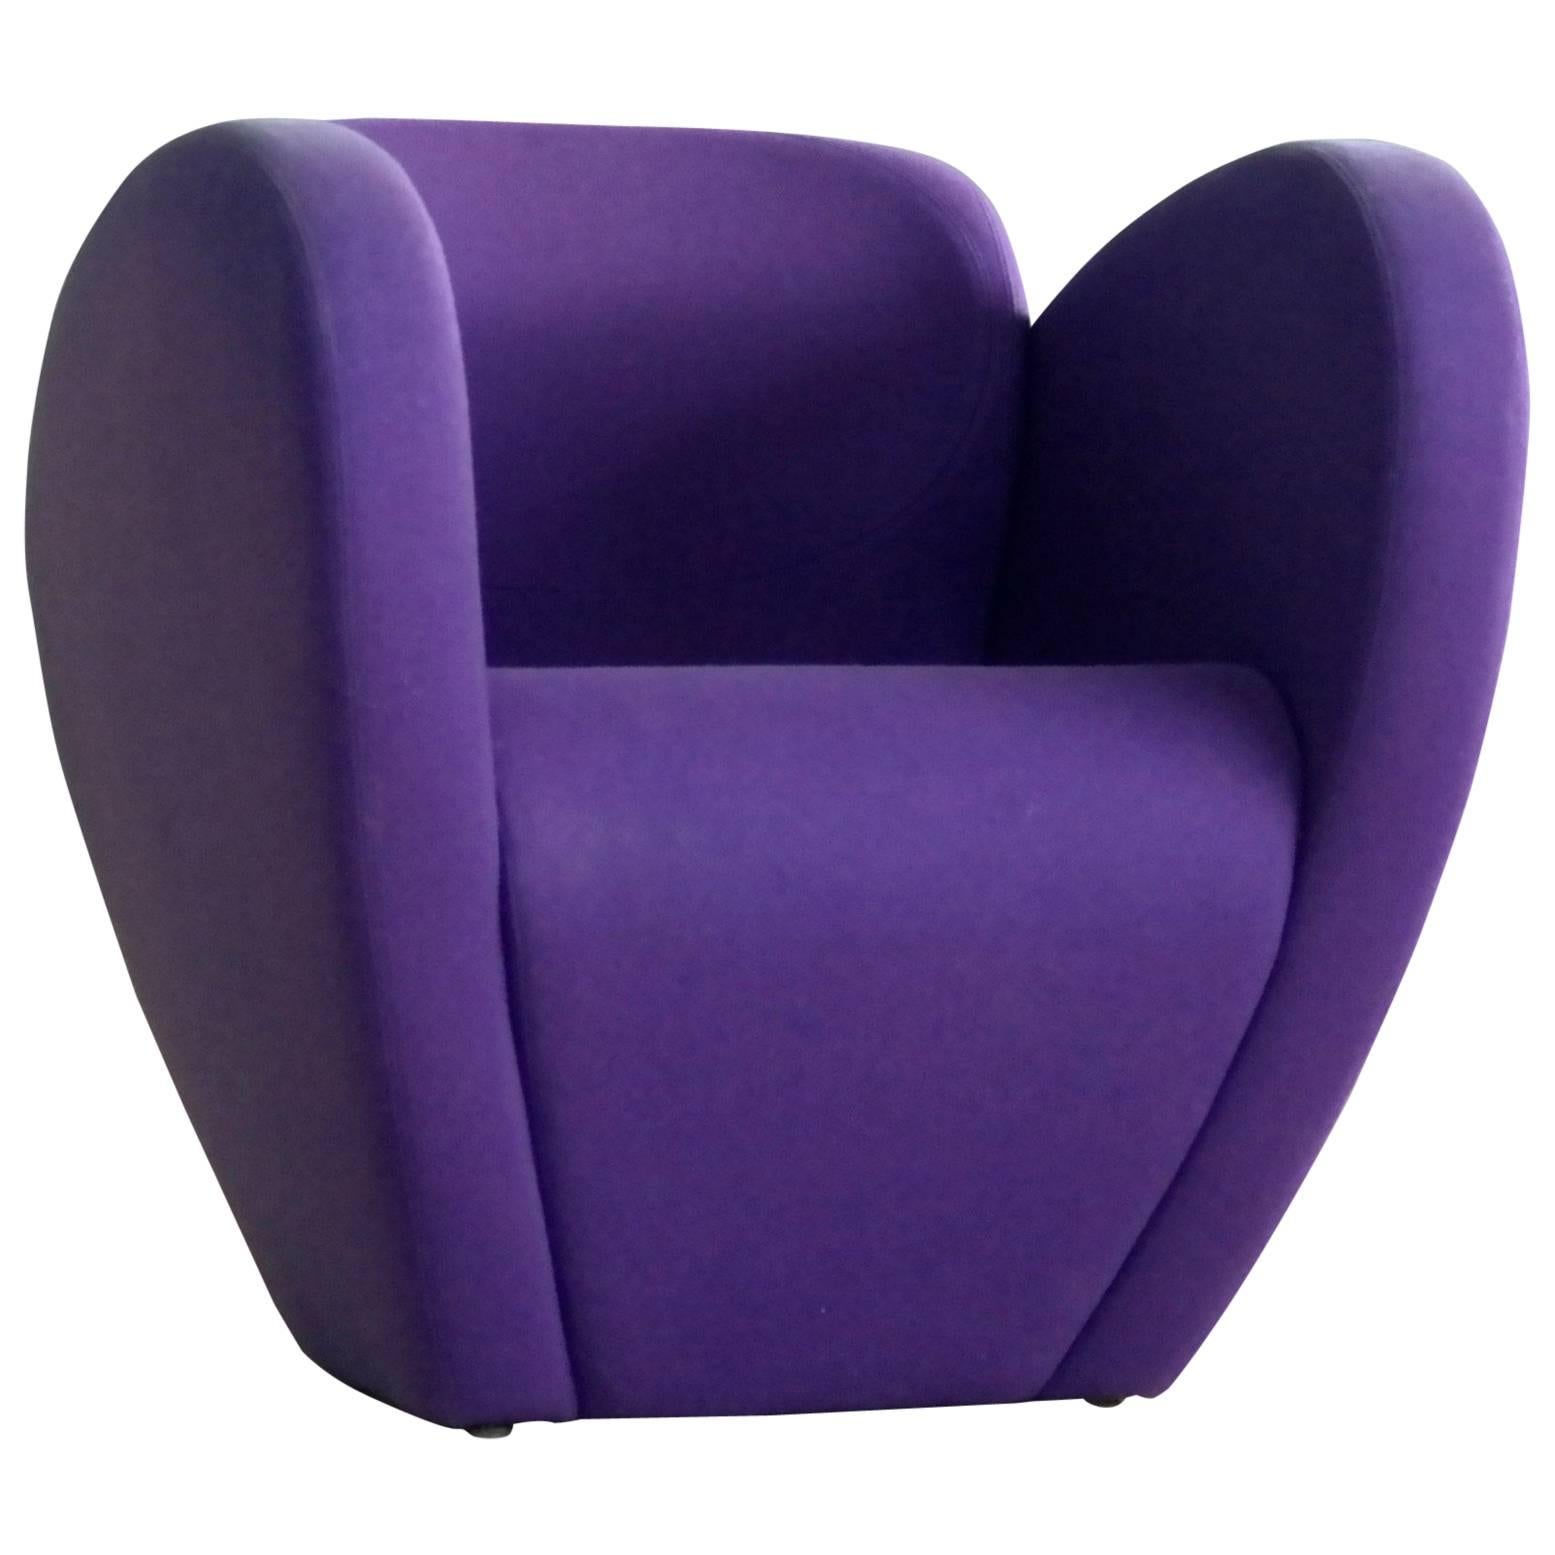 Ron Arad Lounge Chair Model in Purple Wool for Moroso, Italy